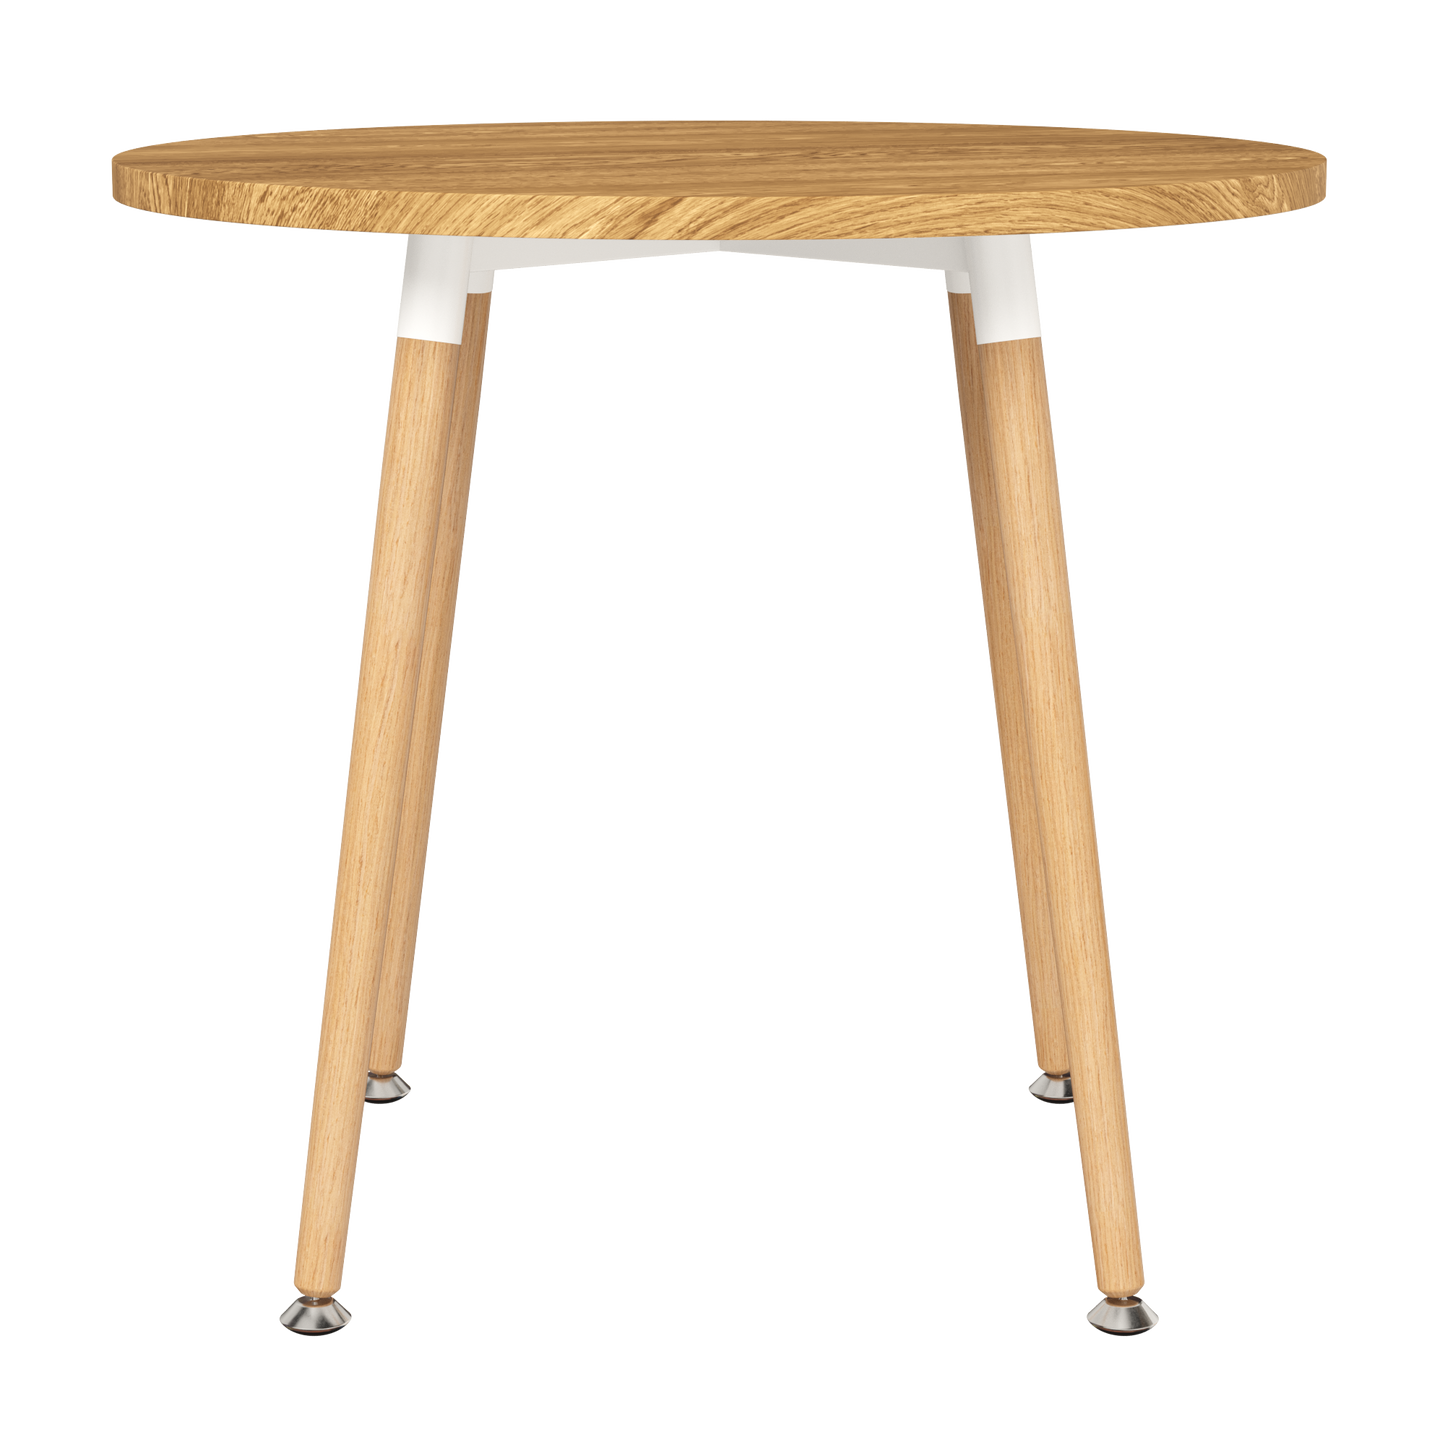 CHOTTO - Enso Round Top Dining Table with Wooden Legs - Wood